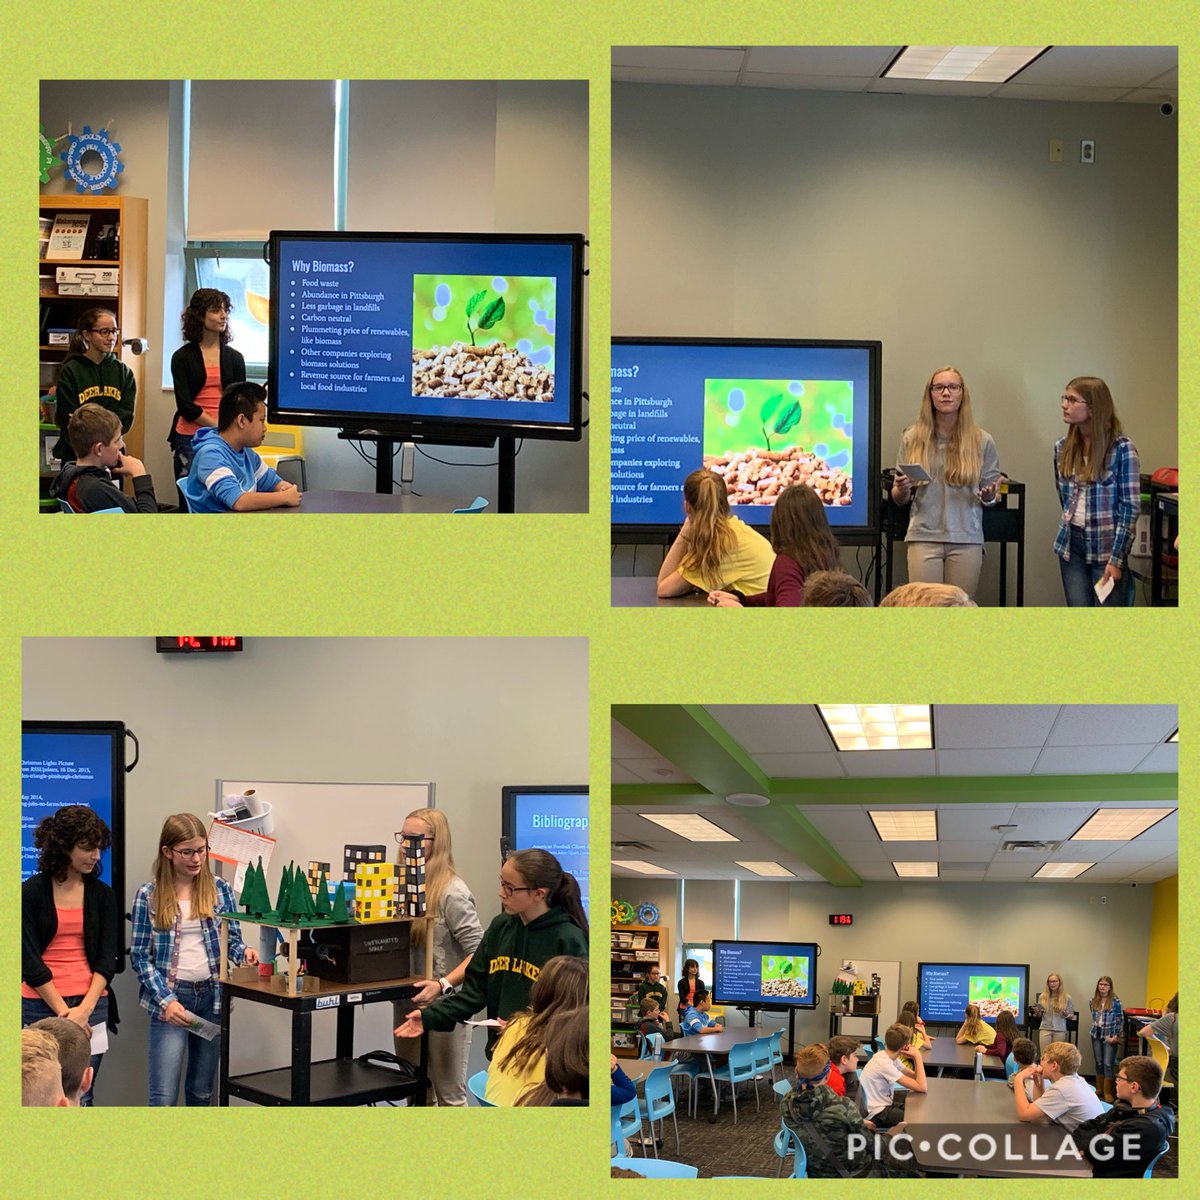 The Boswell’s Bioburgh group practiced their presentation for the Powering Pittsburgh championship event tomorrow. Wishing them the best of luck! @Shell @AlleghenyIU3 @PADeptofEd @heinzfield #FossilFuels #RenewableEnergy #StudentCompetition #DLProud